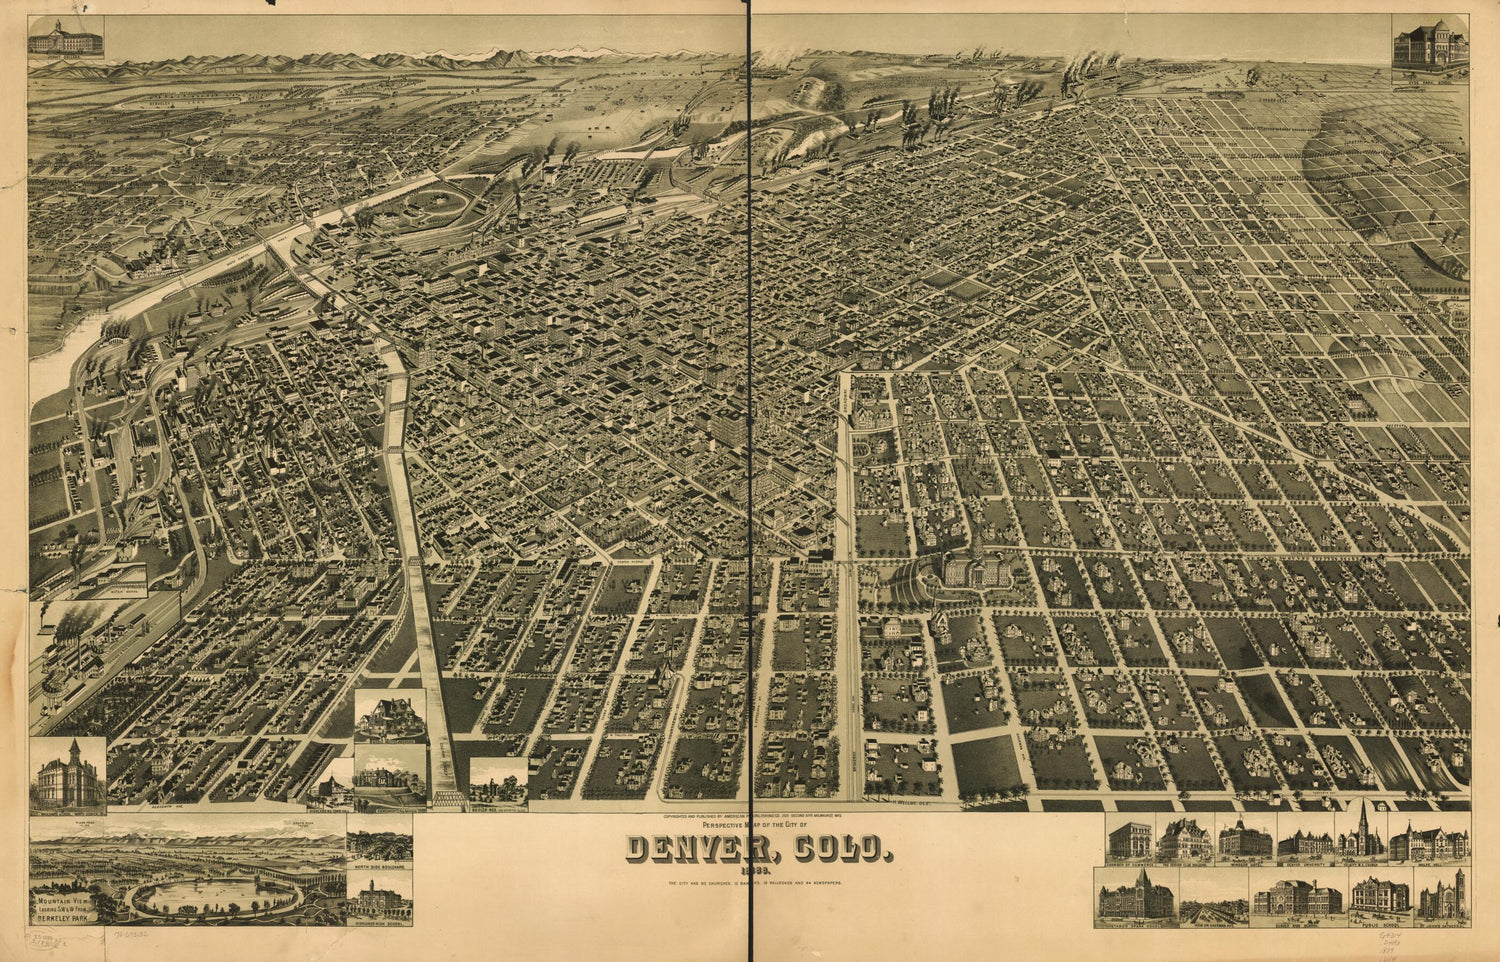 This old map of Perspective Map of the City of Denver,Colorado from 1889 was created by Wis.) American Publishing Co. (Milwaukee, H. (Henry) Wellge in 1889